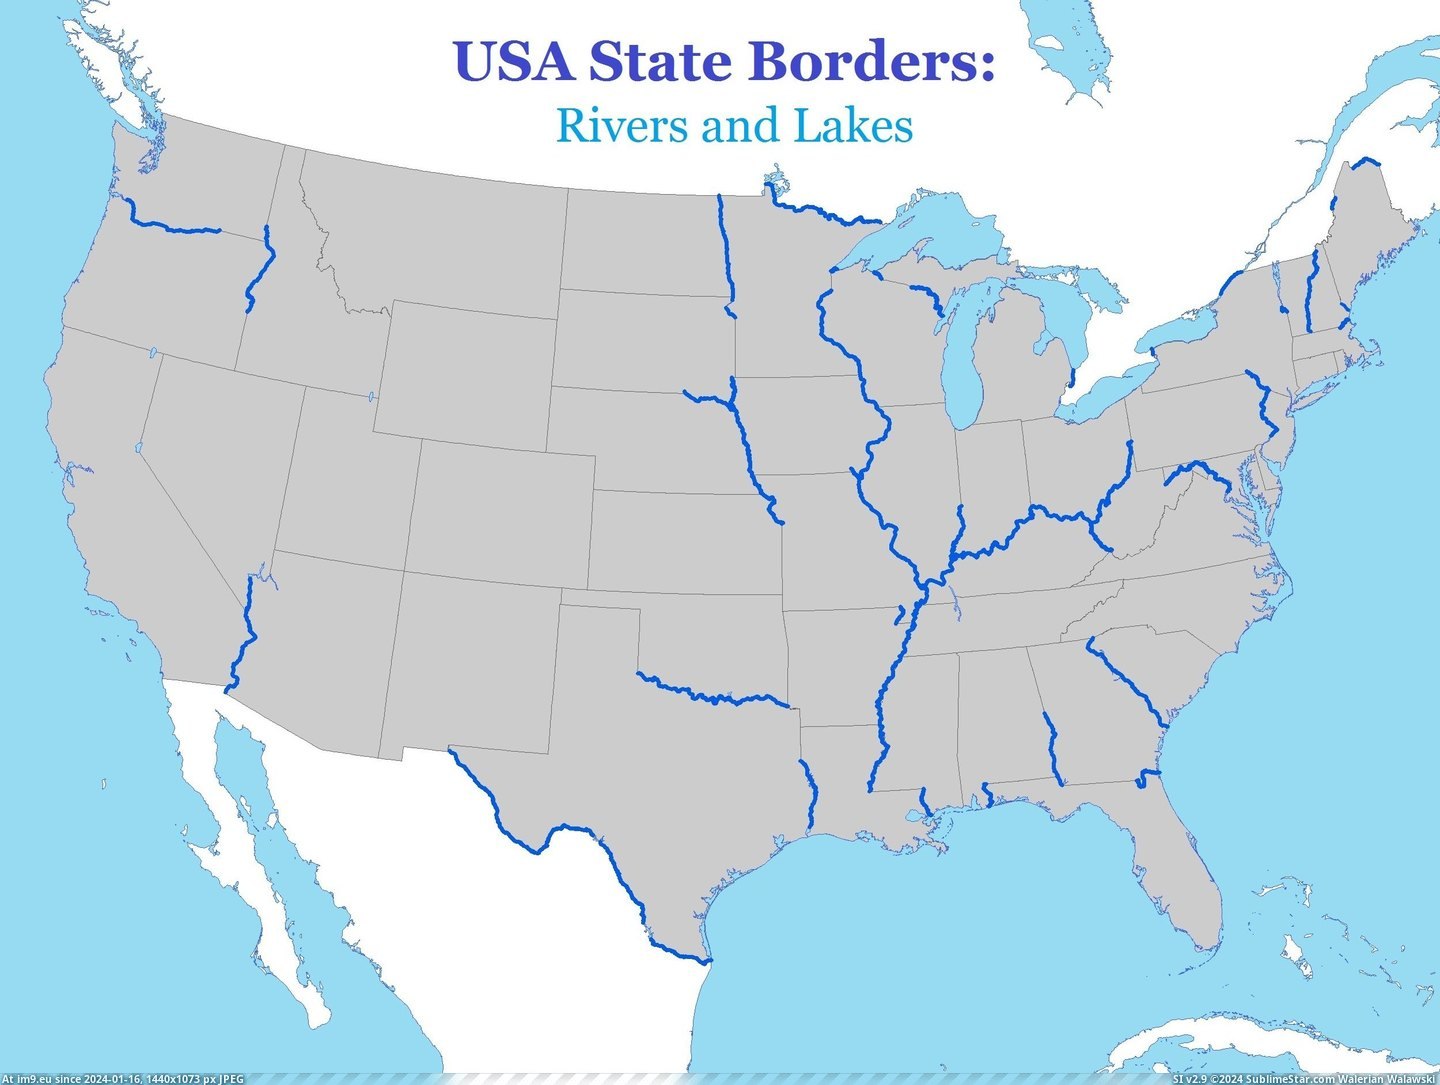 #State #Usa #Rivers #Lakes #Borders [Mapporn] USA State Borders: Rivers and Lakes [2500x1875] Pic. (Bild von album My r/MAPS favs))